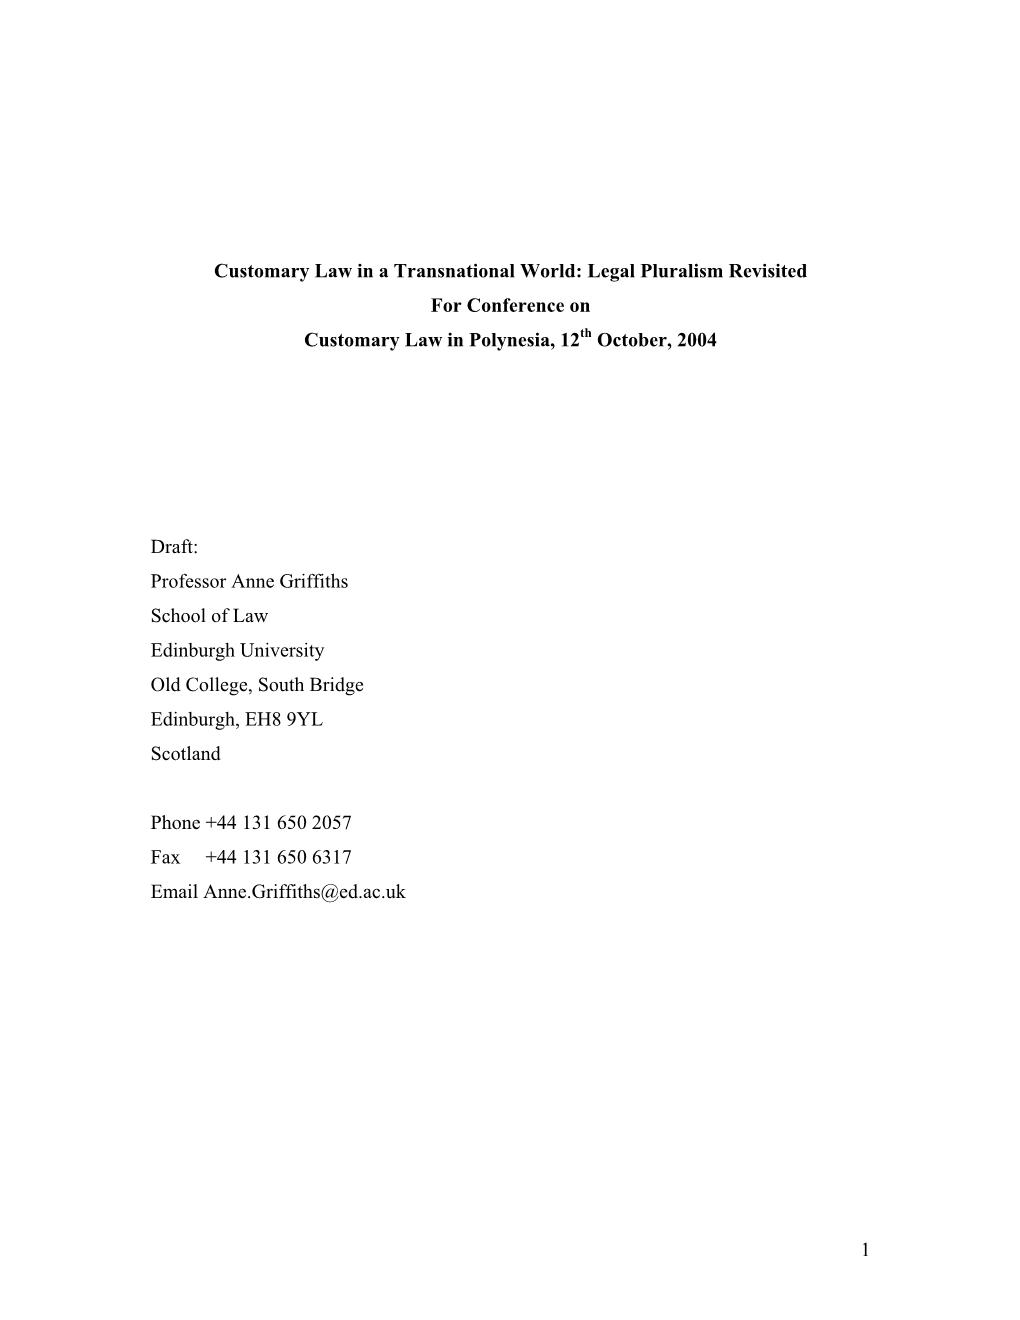 Customary Law in a Transnational World: Legal Pluralism Revisited for Conference on Customary Law in Polynesia, 12Th October, 2004